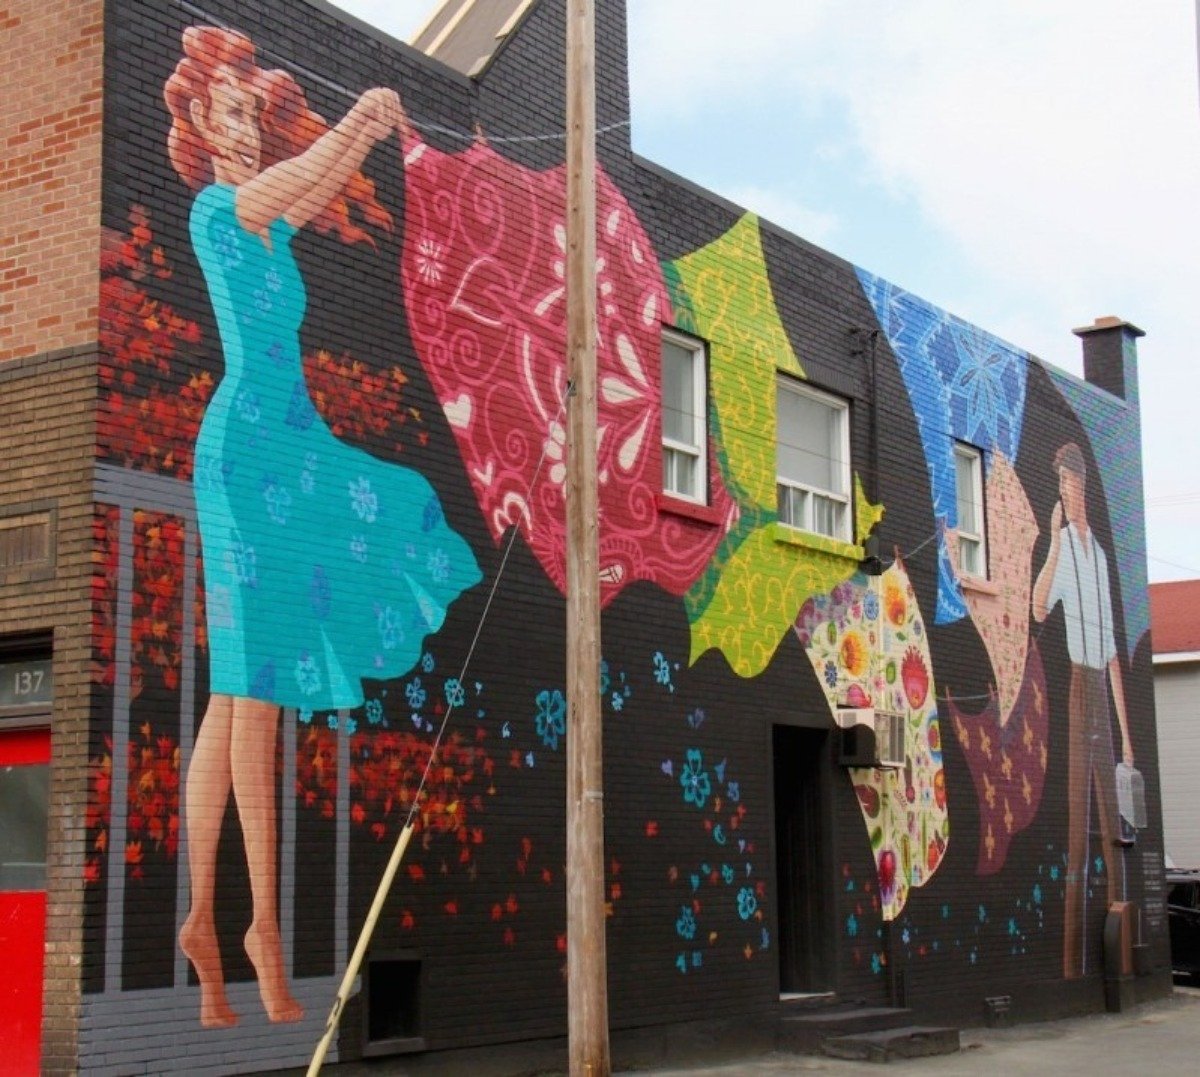 Large mural on a building depicting a woman hanging clothes on a clothesline as a man with a lunchbox looks on